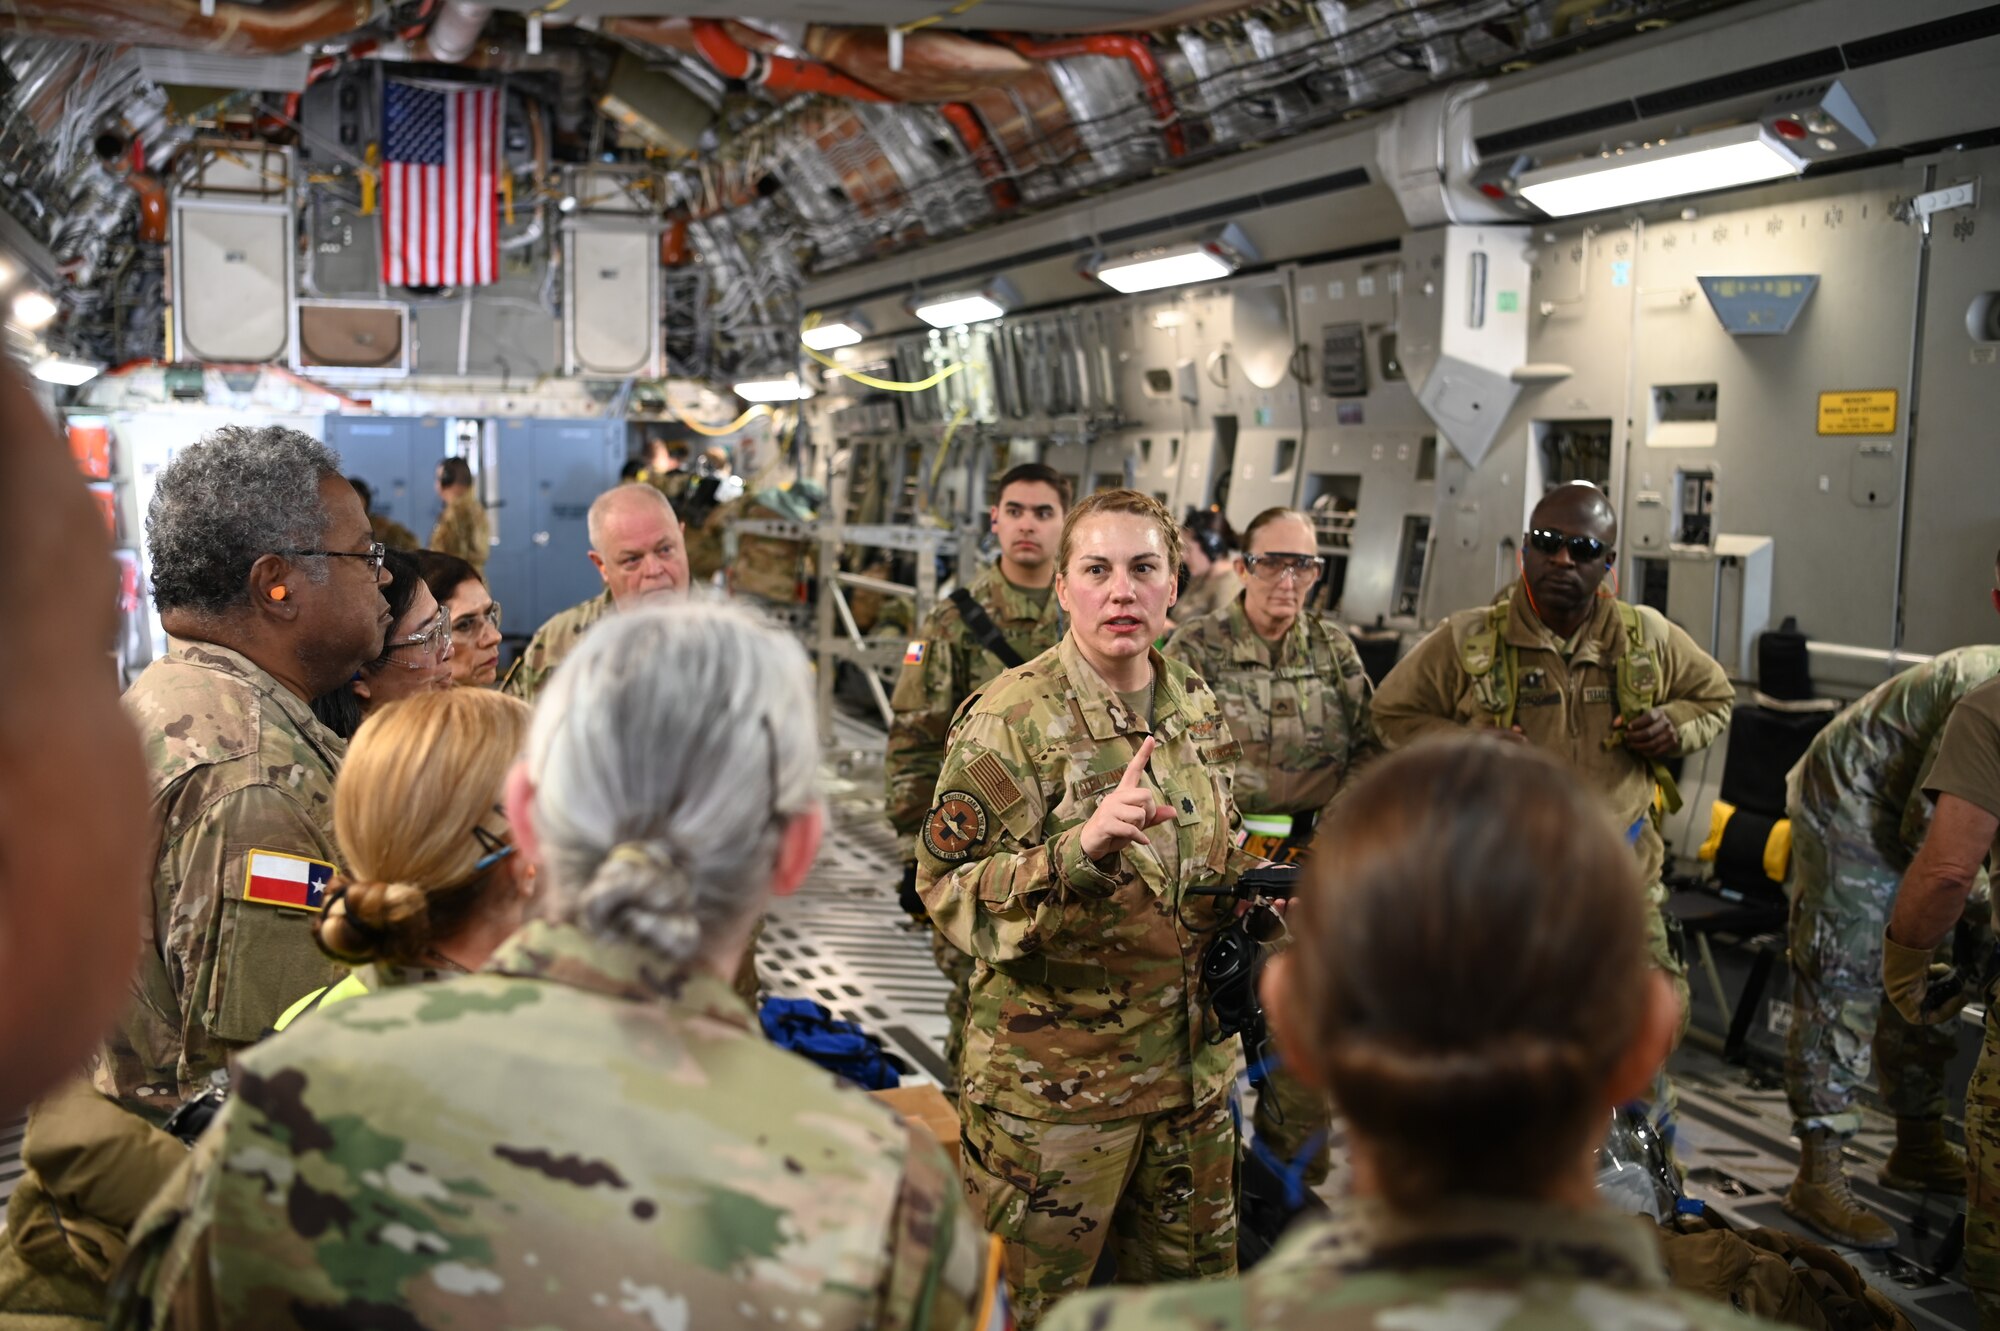 Lt. Col. Carolyn Stateczny, 433rd Aeromedical Evacuation Squadron chief of standards and evaluation, briefs a group of Texas State Guard medical personnel about the capabilities of an Air Force AES during a joint medical training event at Joint Base San Antonio-Lackland, Texas on Feb. 24, 2024.